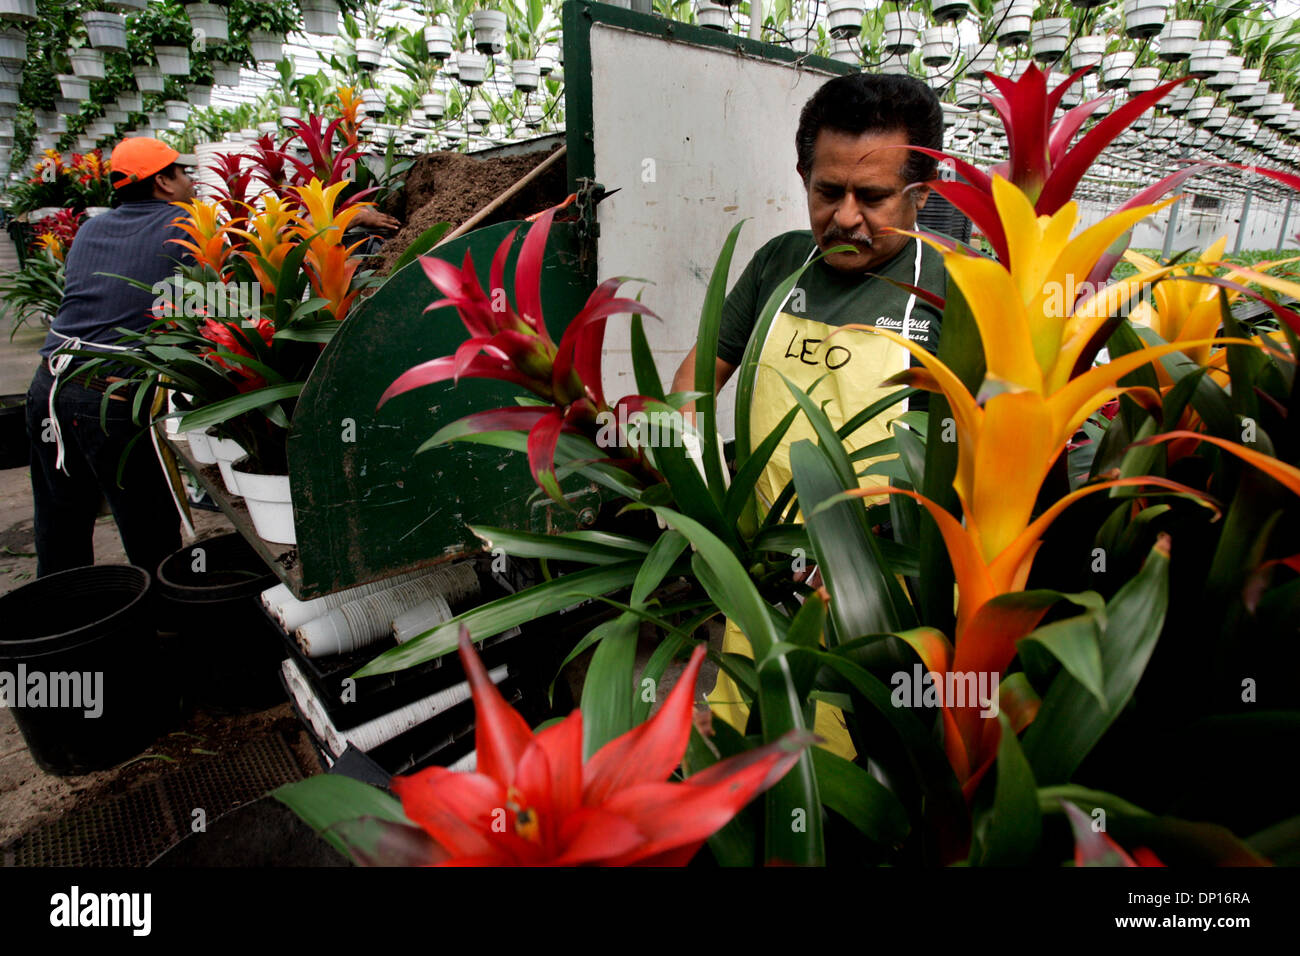 Apr 21, 2006; Fallbrook, CA, USA; LEOPOLDO CALISTO works under a canopy of indoor plants with several varieties of Guzmania Bromeliads to arrange them for shipping from Olive Hill Greenhouses in Fallbrook. The company is a big producer of bromeliads, orchids and indoor plants.  Mandatory Credit: Photo by Laura Embry/SDU-T /ZUMA Press. (©) Copyright 2006 by SDU-T Stock Photo